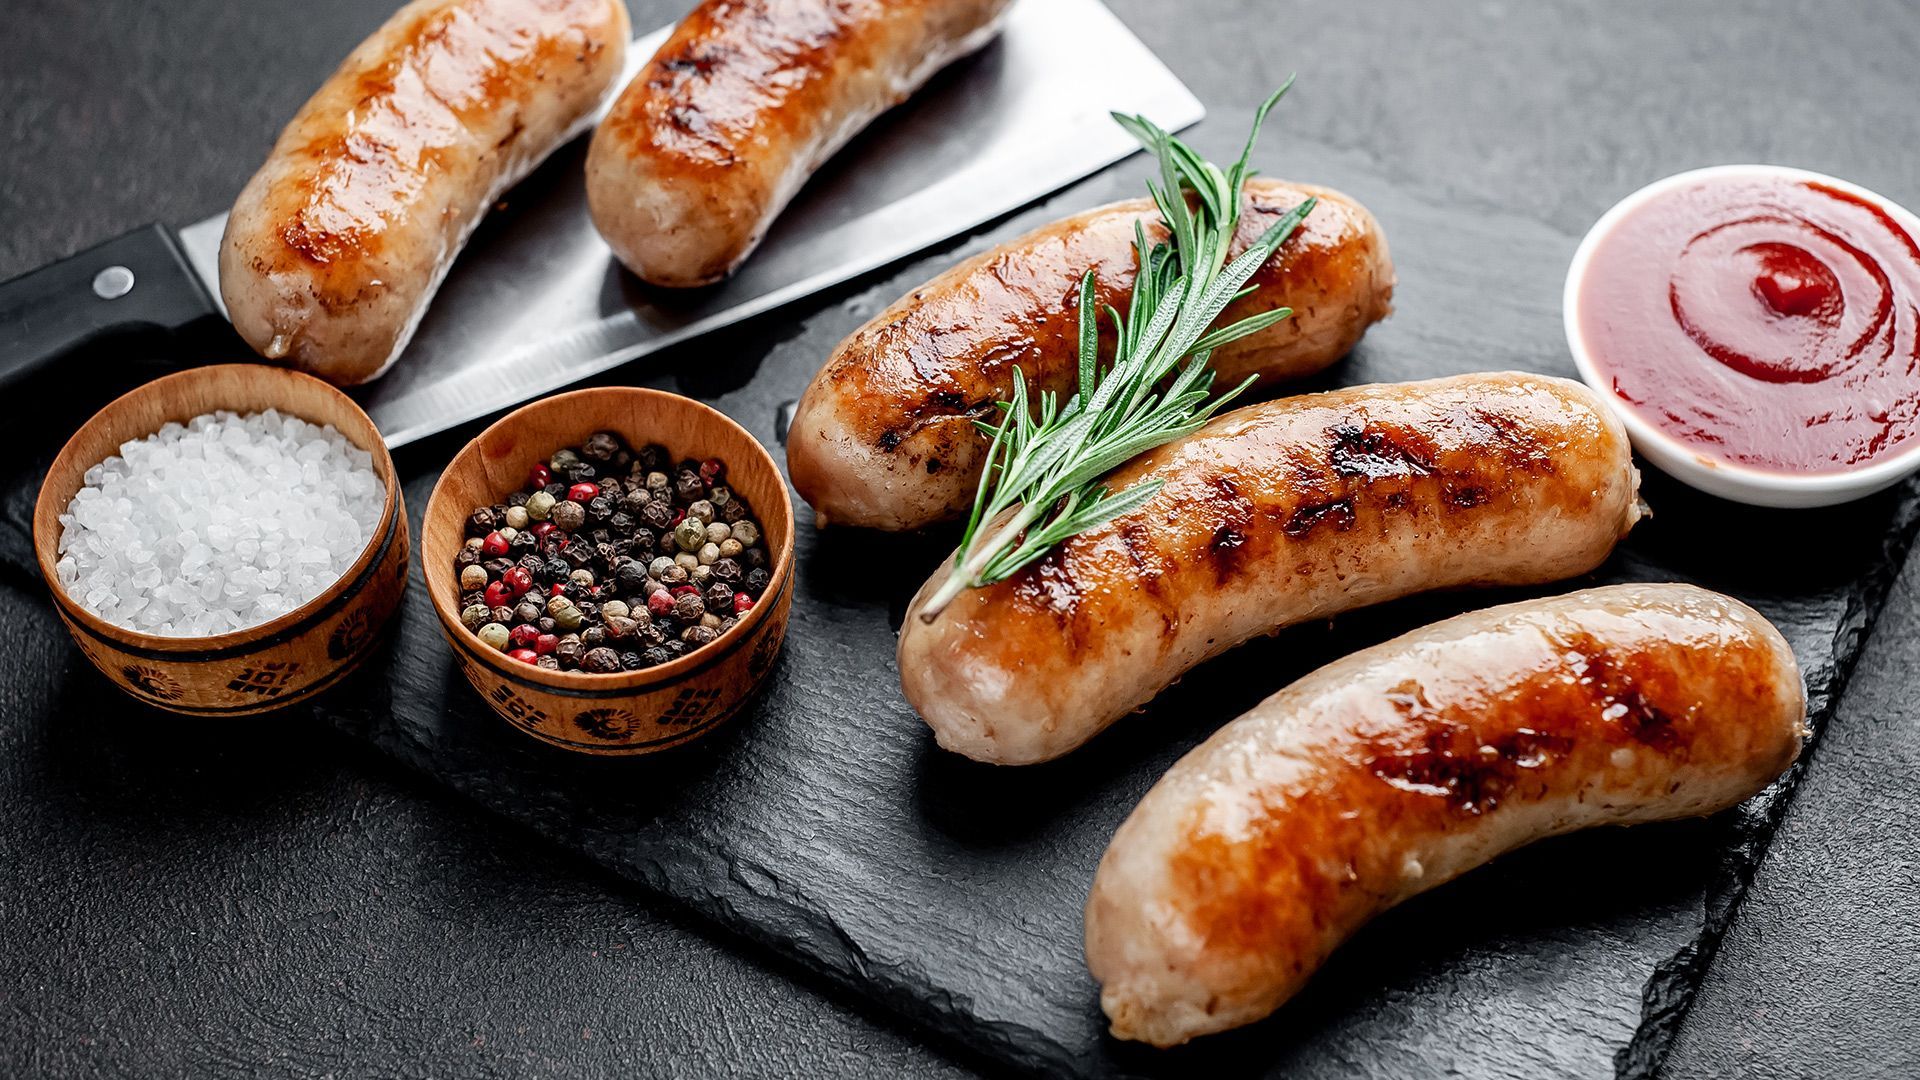 Sausages from Montgomery's Butchers